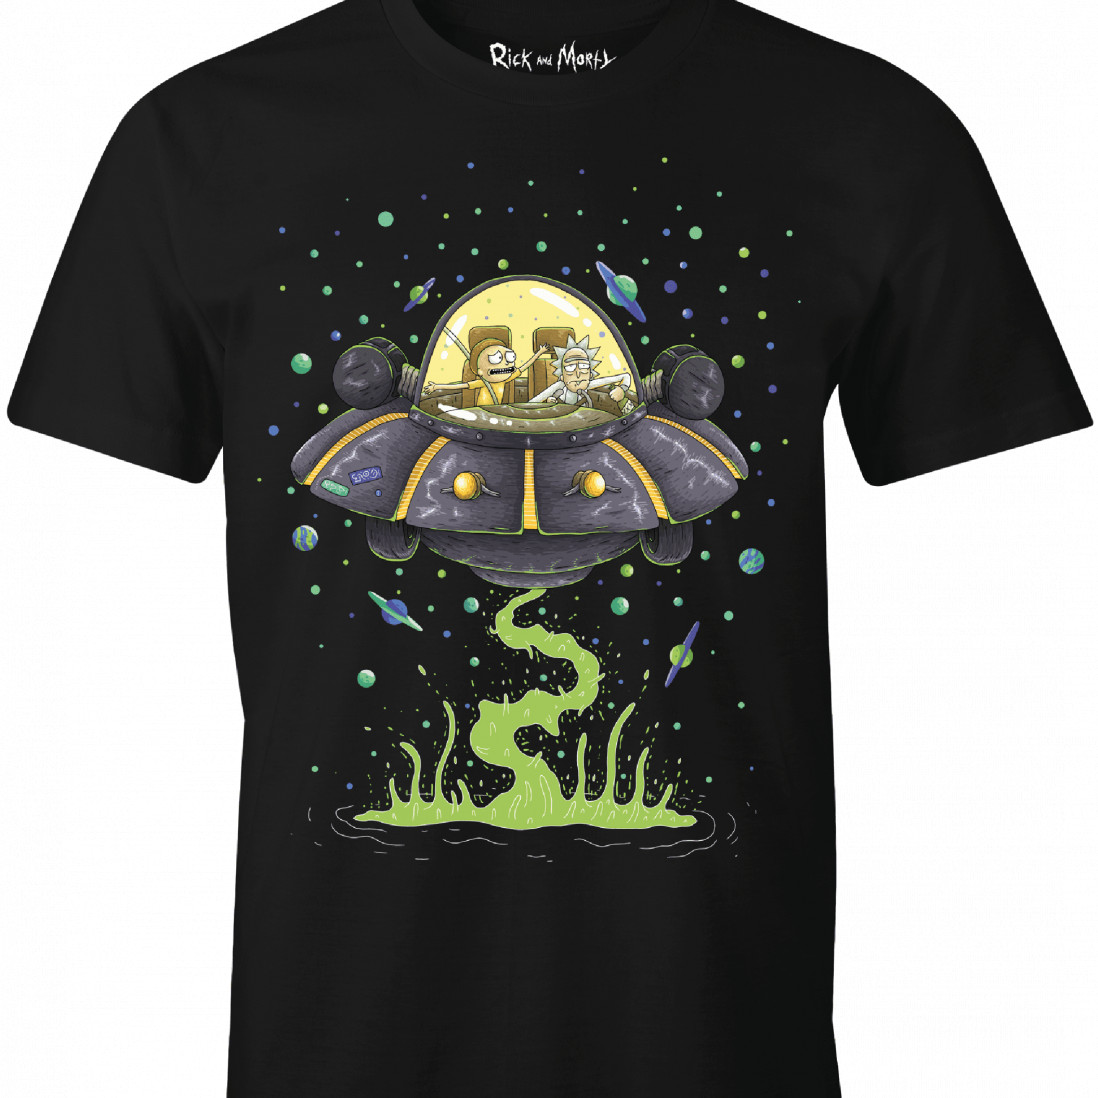 rick and morty t shirt soucoupe